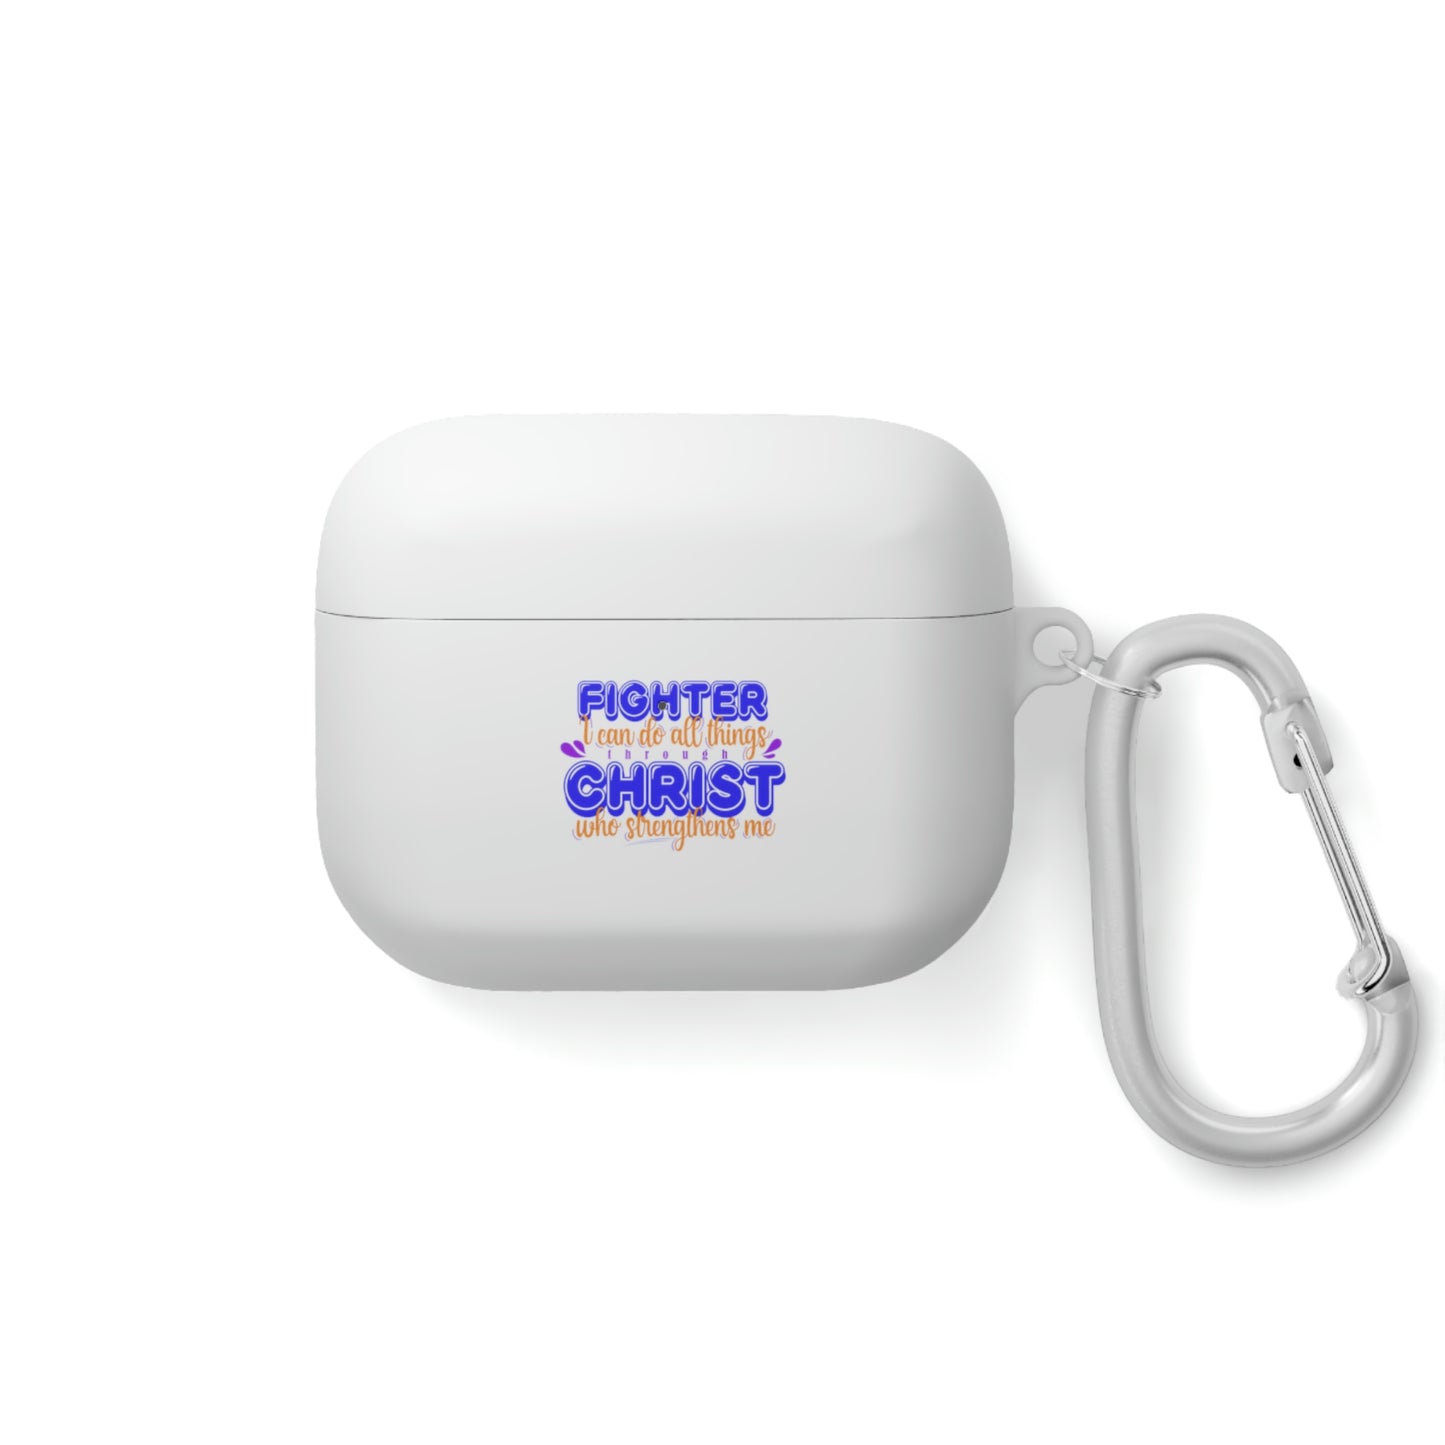 Fighter I Can Do All Things Through Christ Who Strengthens Me AirPods / Airpods Pro Case cover